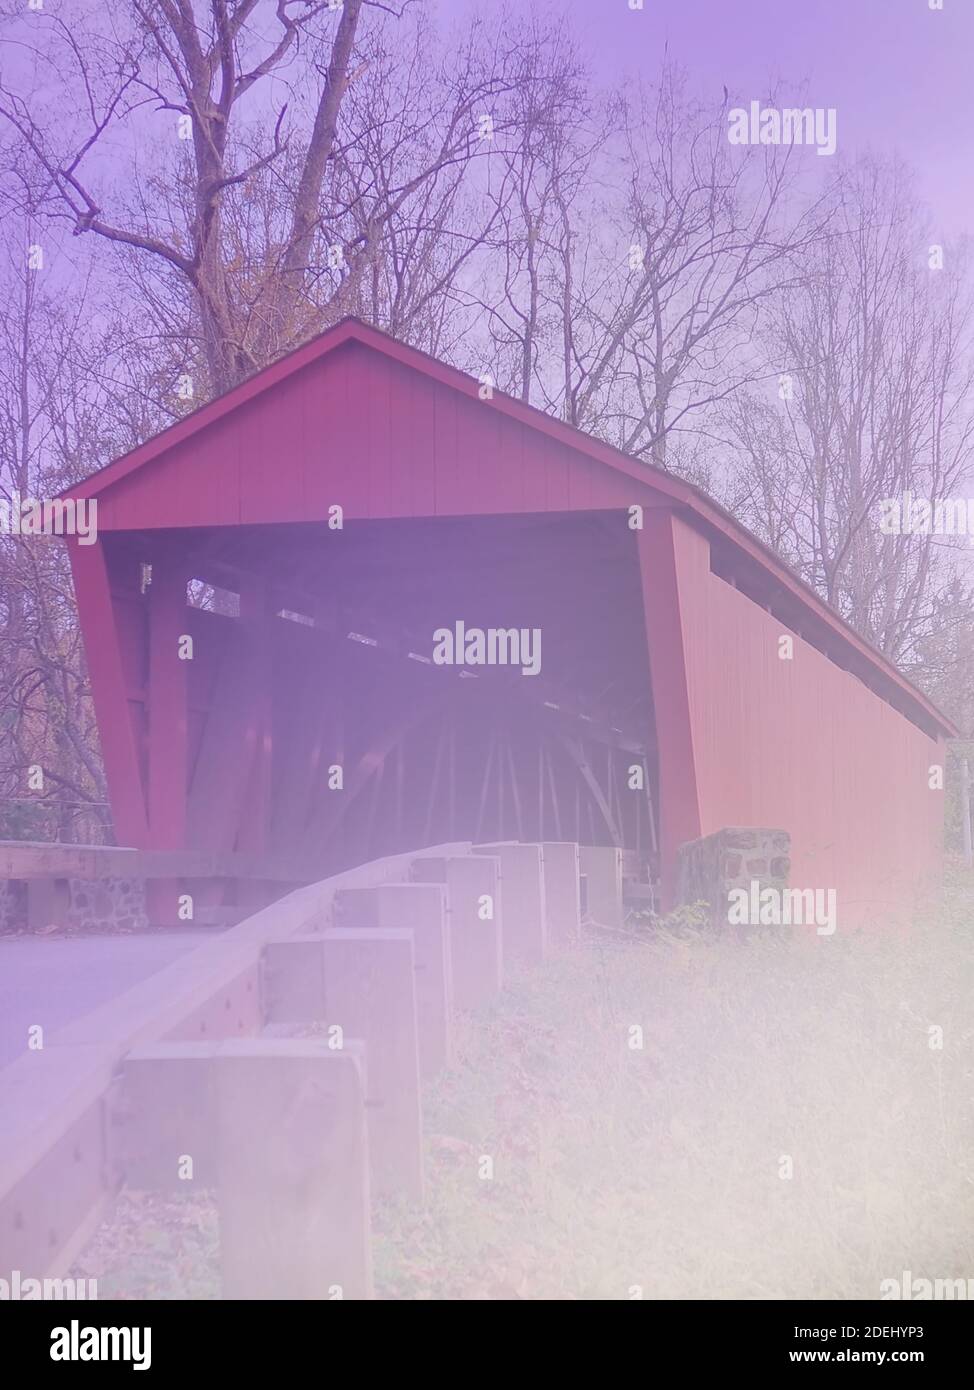 A red covered bridge with fading out foreground and purple background sky,  makes for an artistic, dreamscape, vertical  background image. Stock Photo